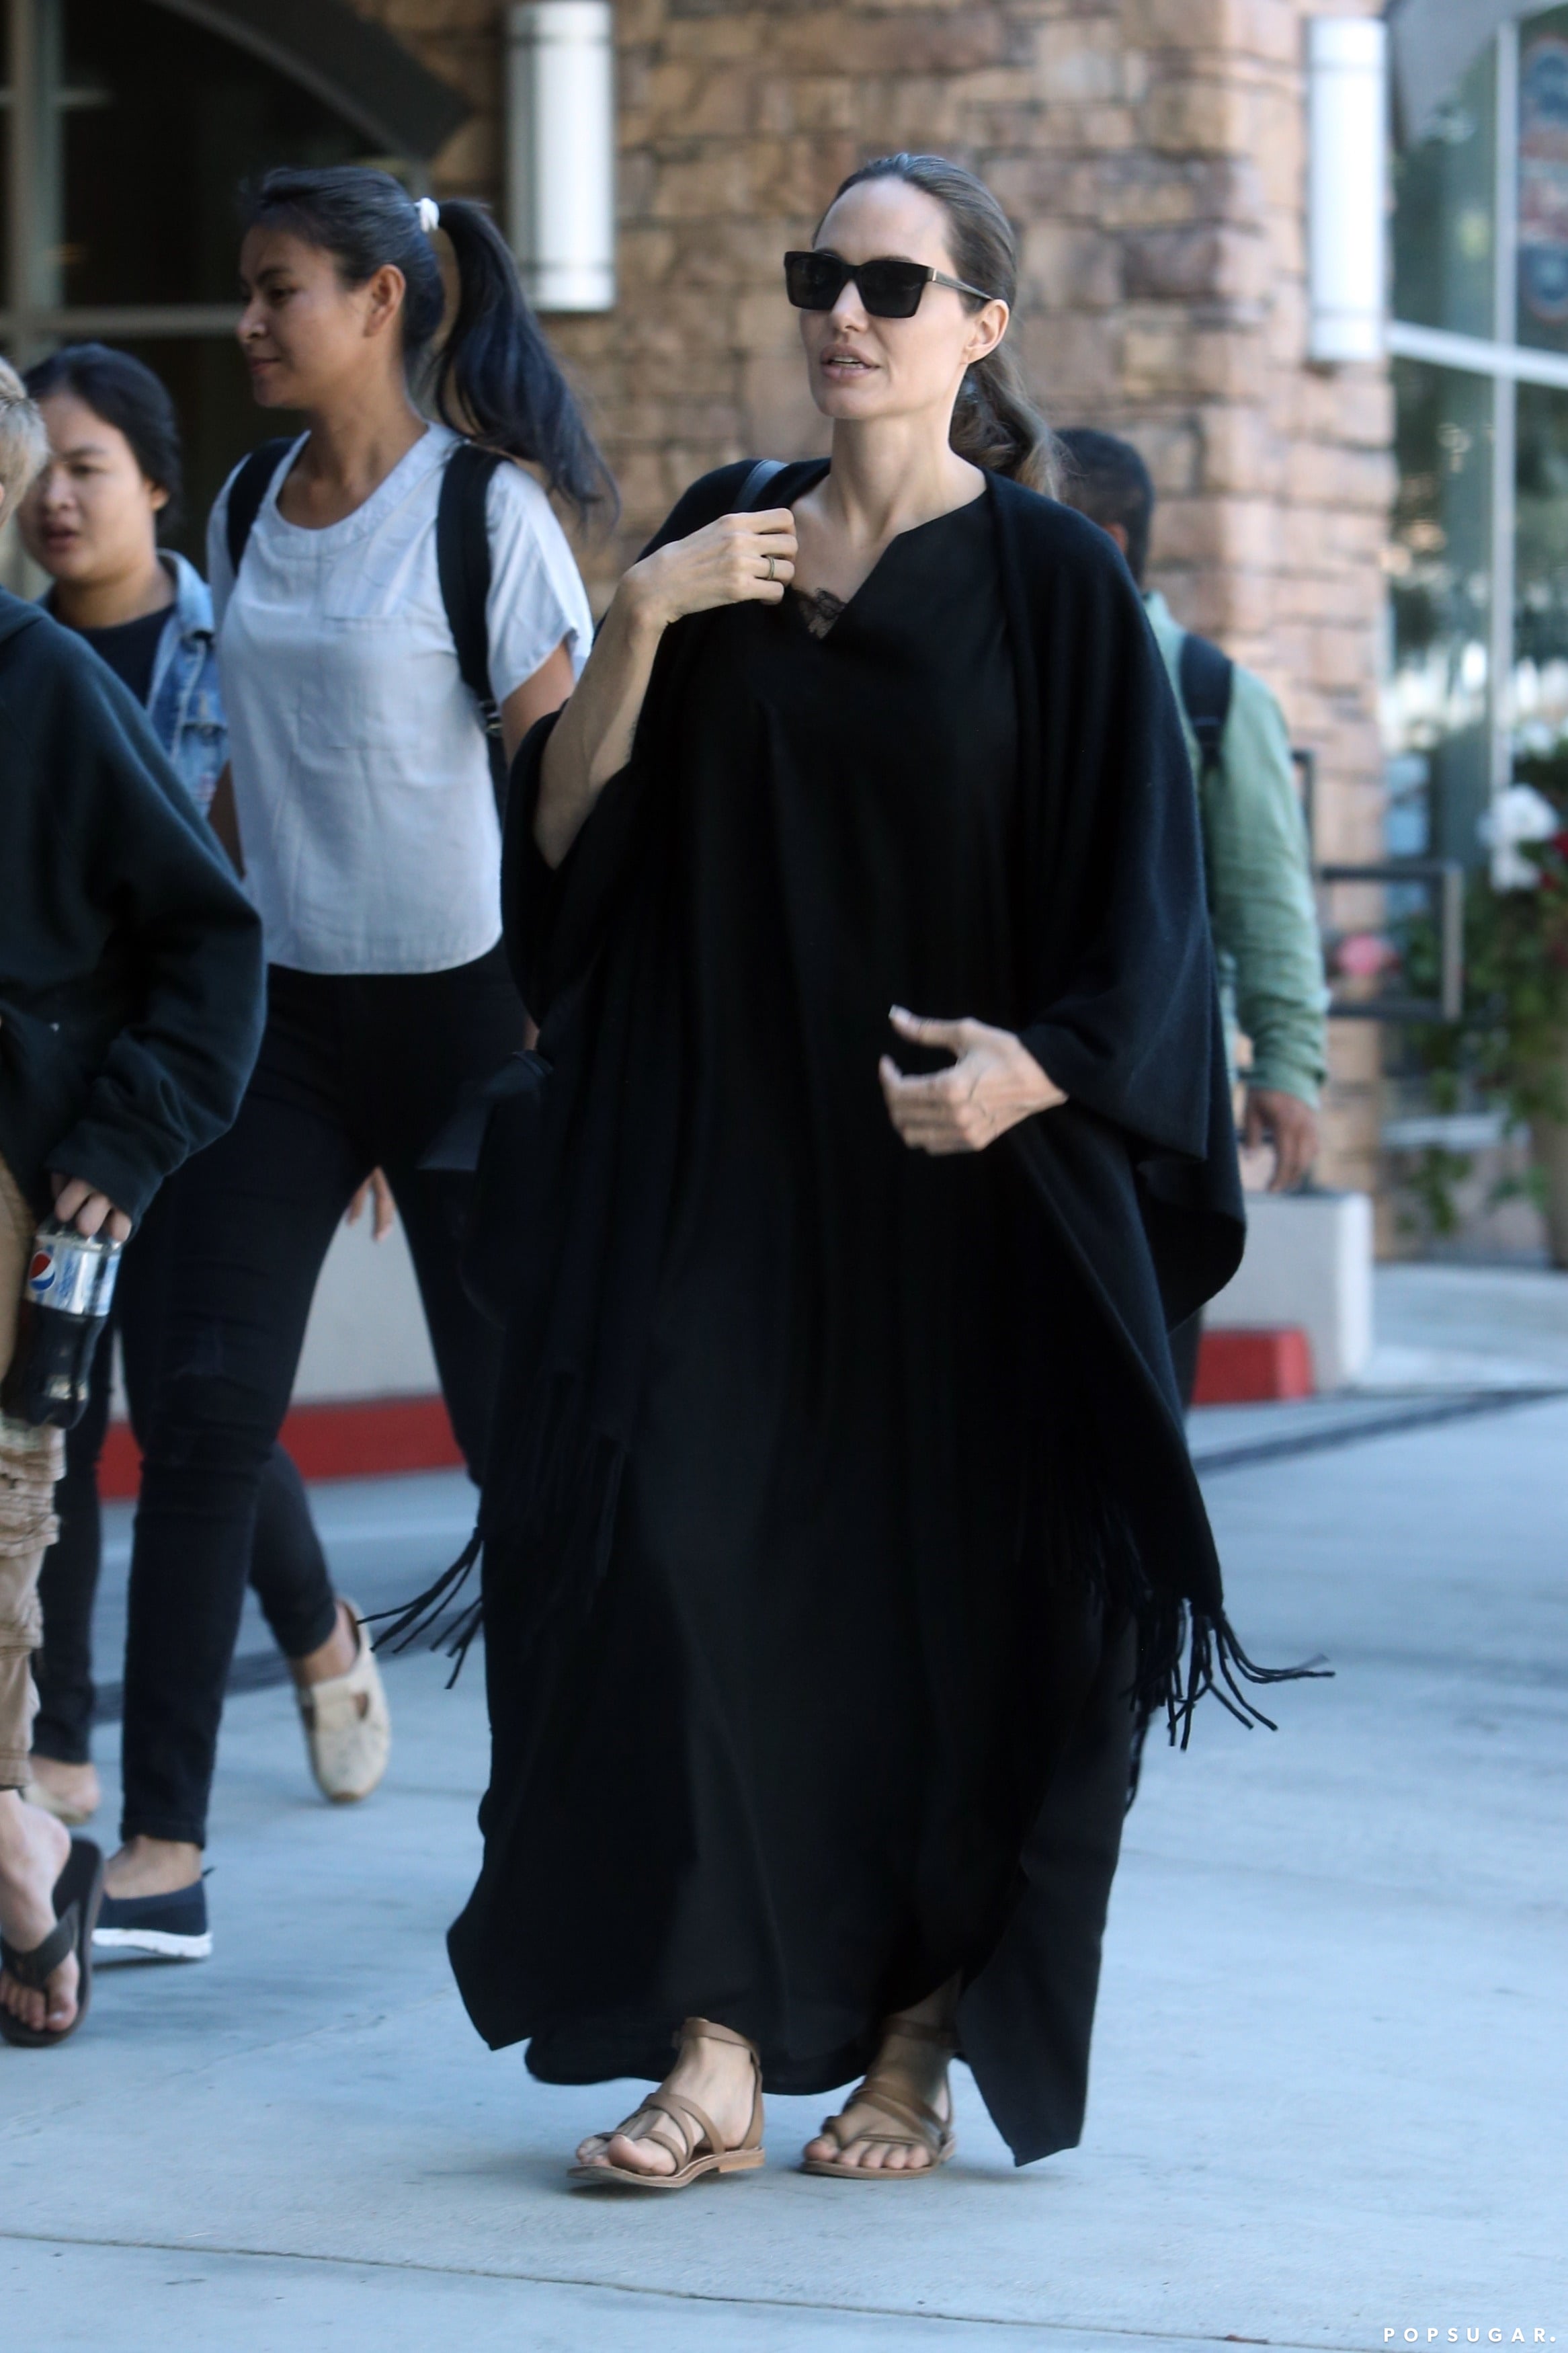 Angelina Jolie Tan Leather Sandals Street Style Spring Summer 2020